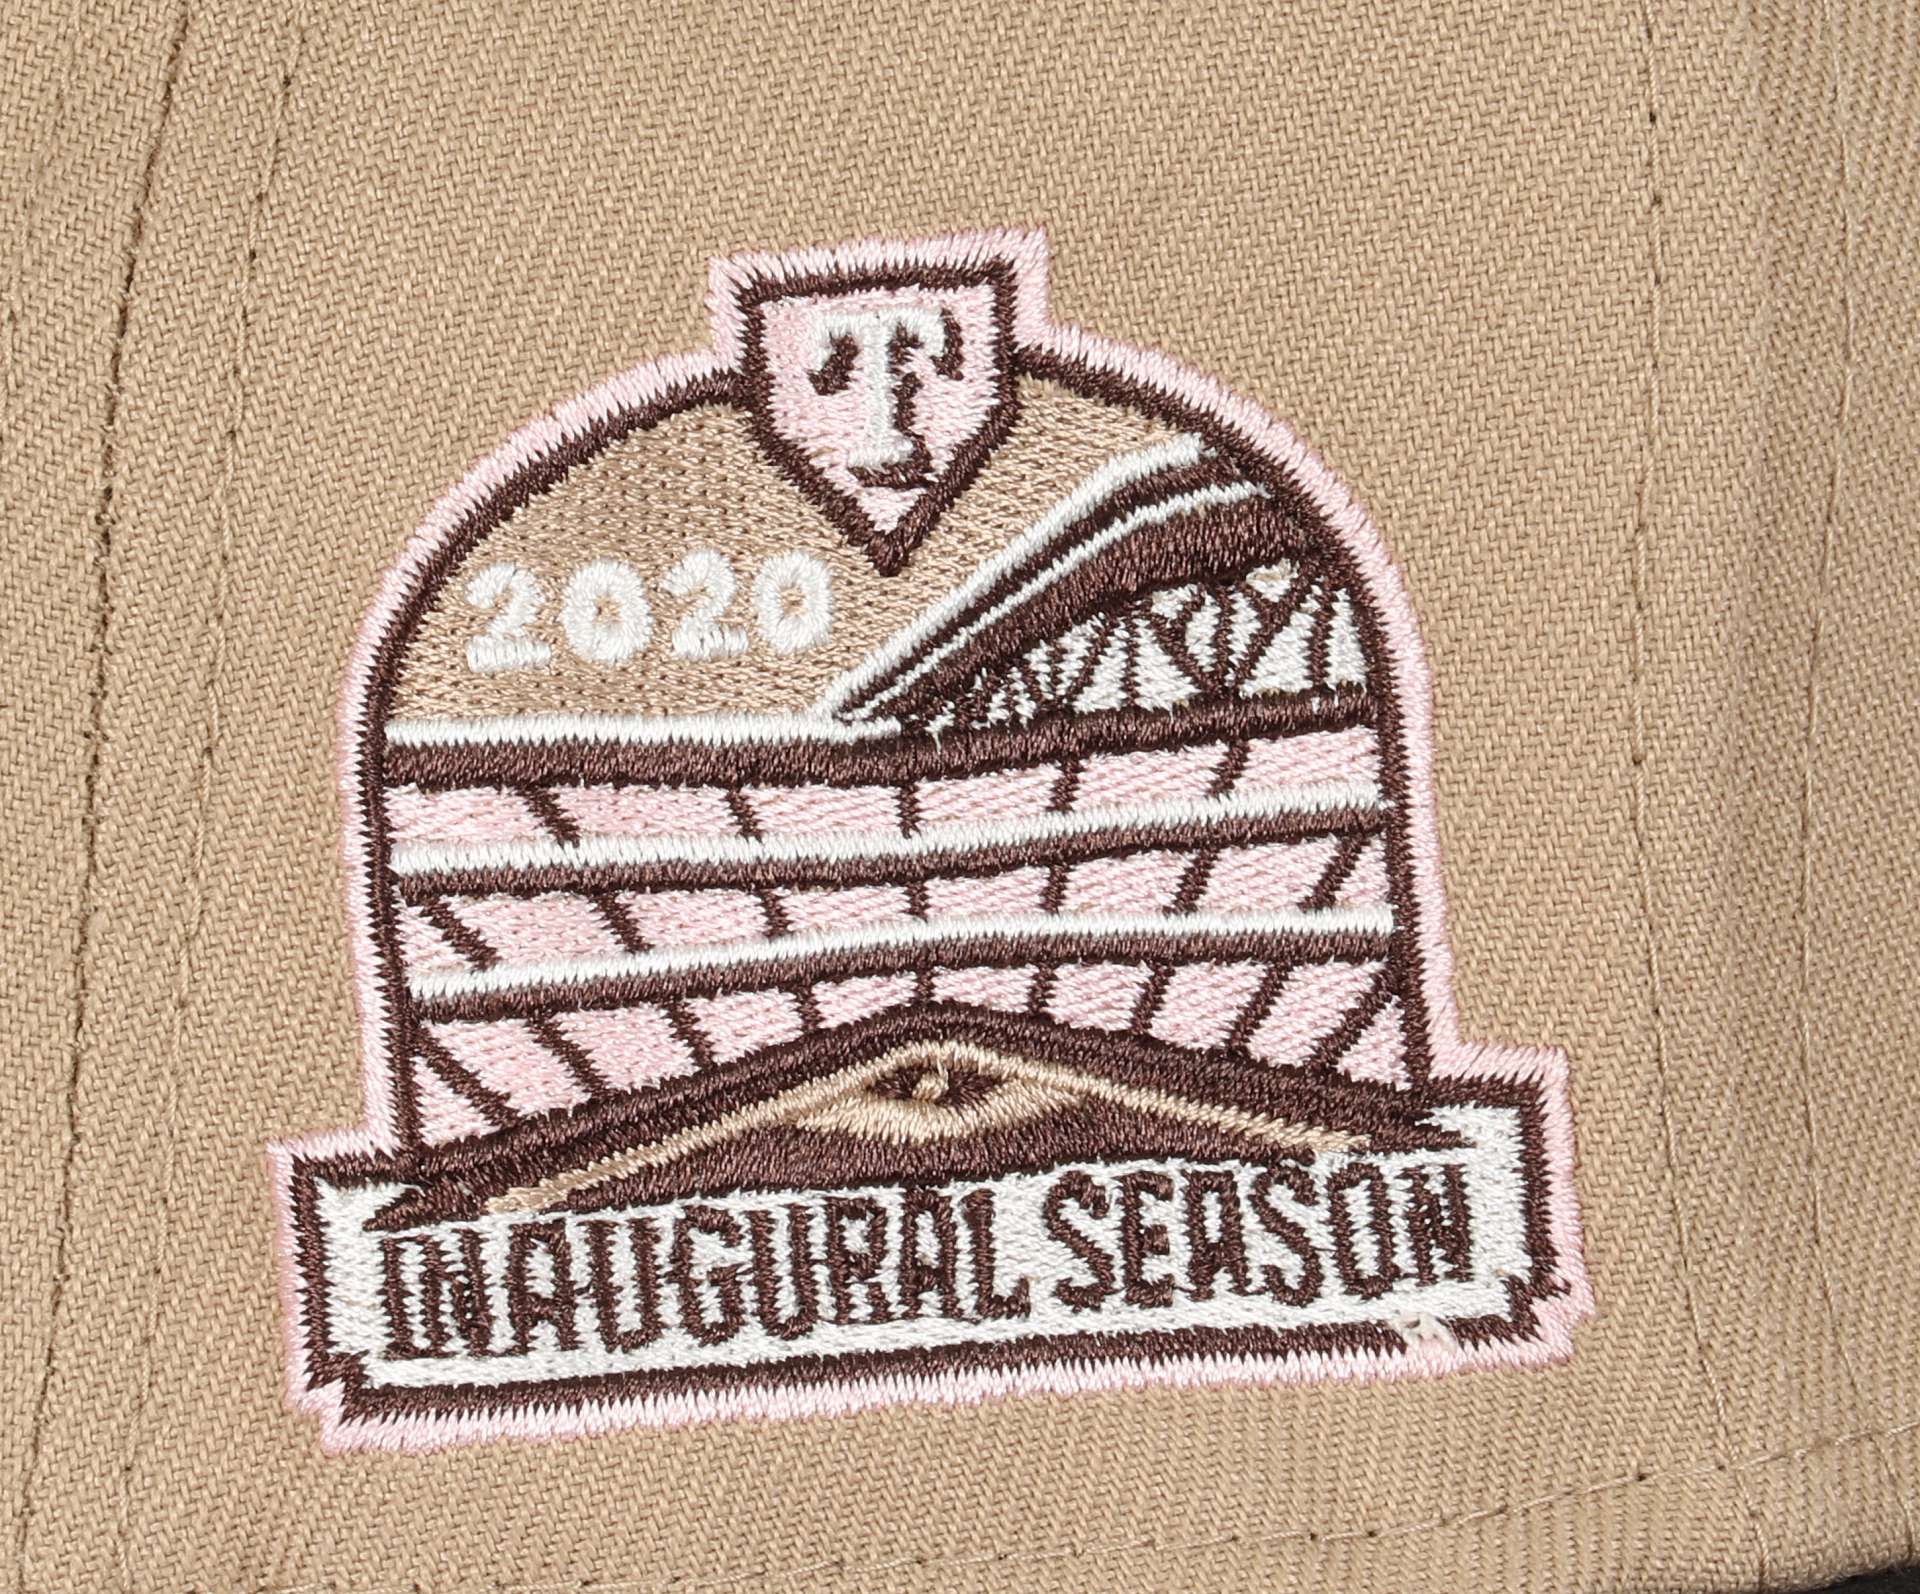 Texas Rangers MLB Cooperstown Inaugural Season 2020 Sidepatch Camel Poly 59Fifty Basecap New Era